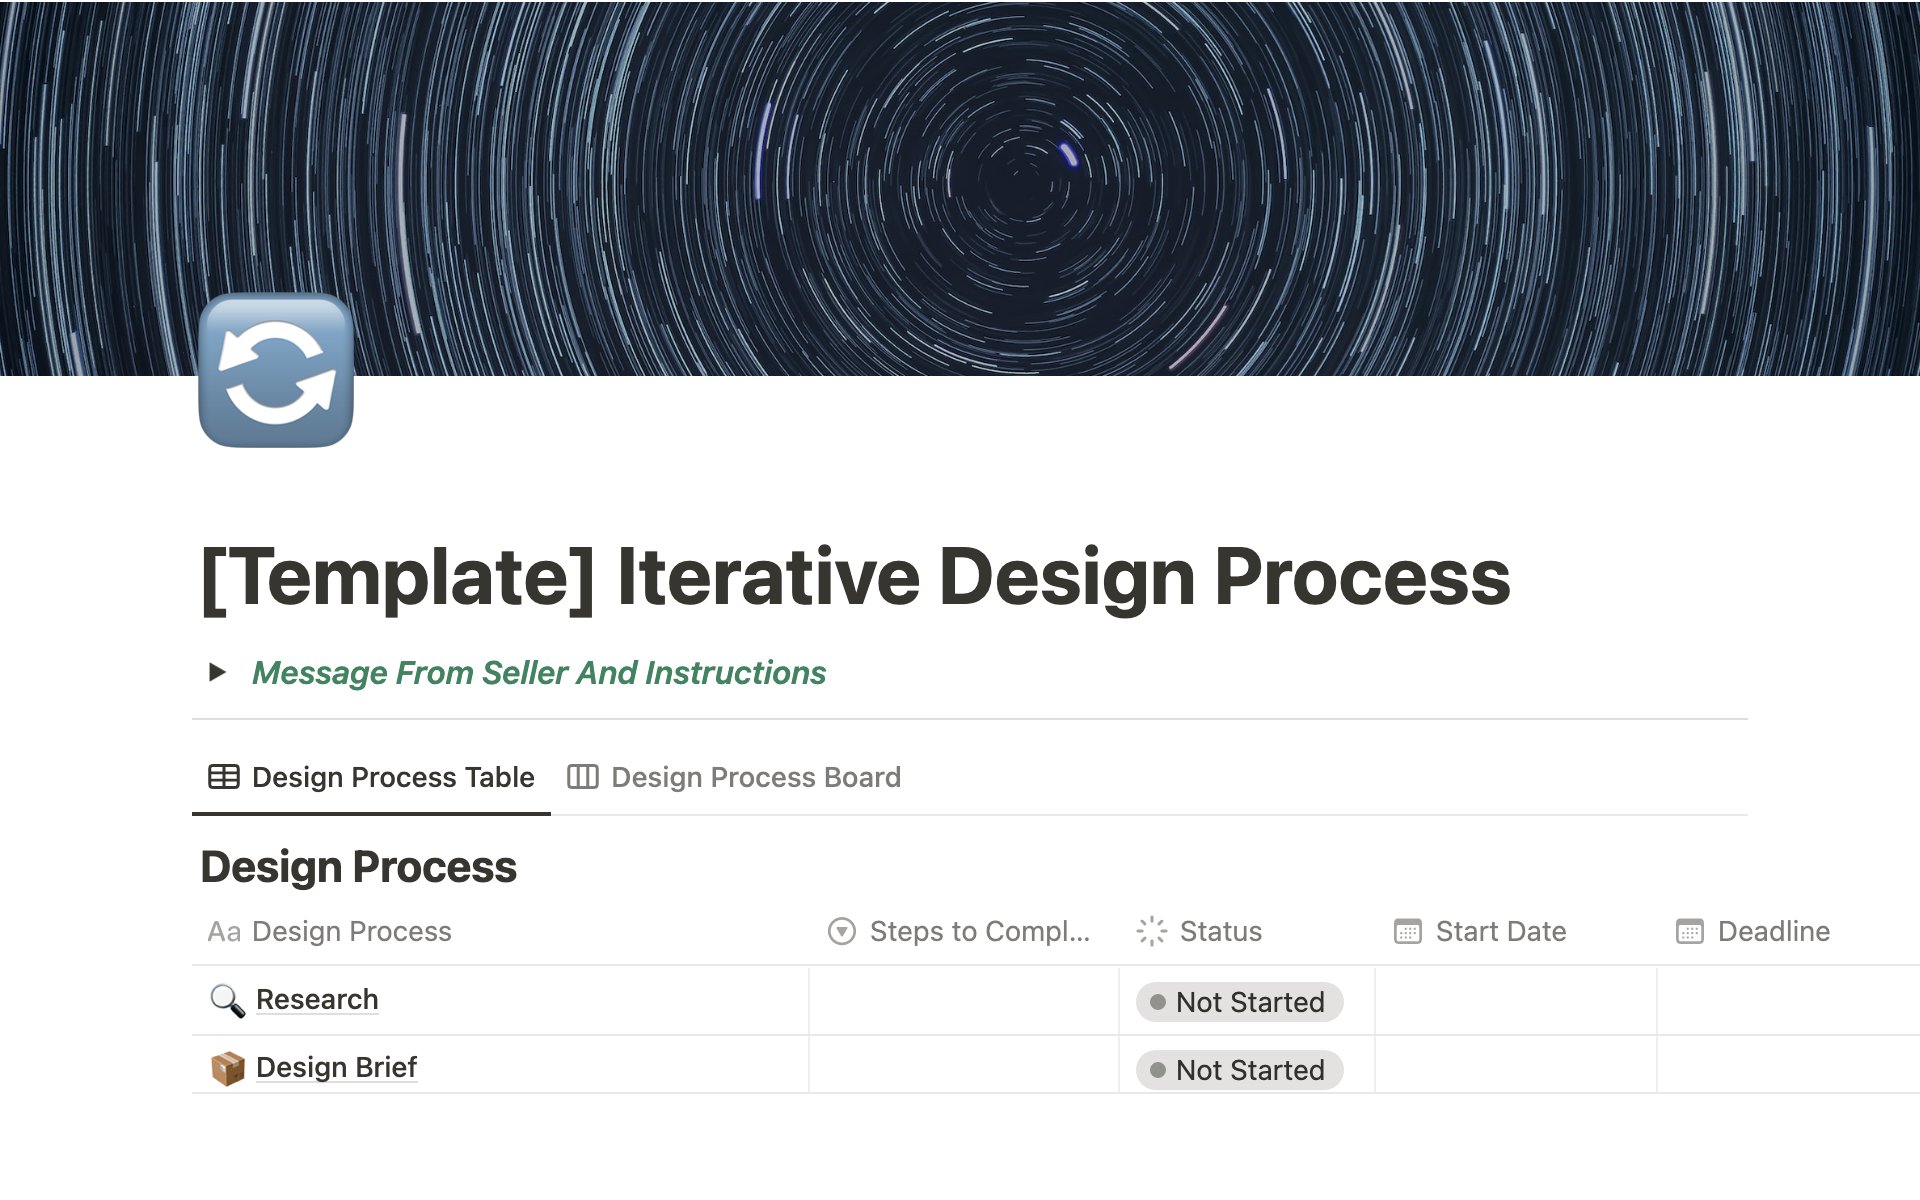 Helps keep track of the steps in the iterative design process for your product.